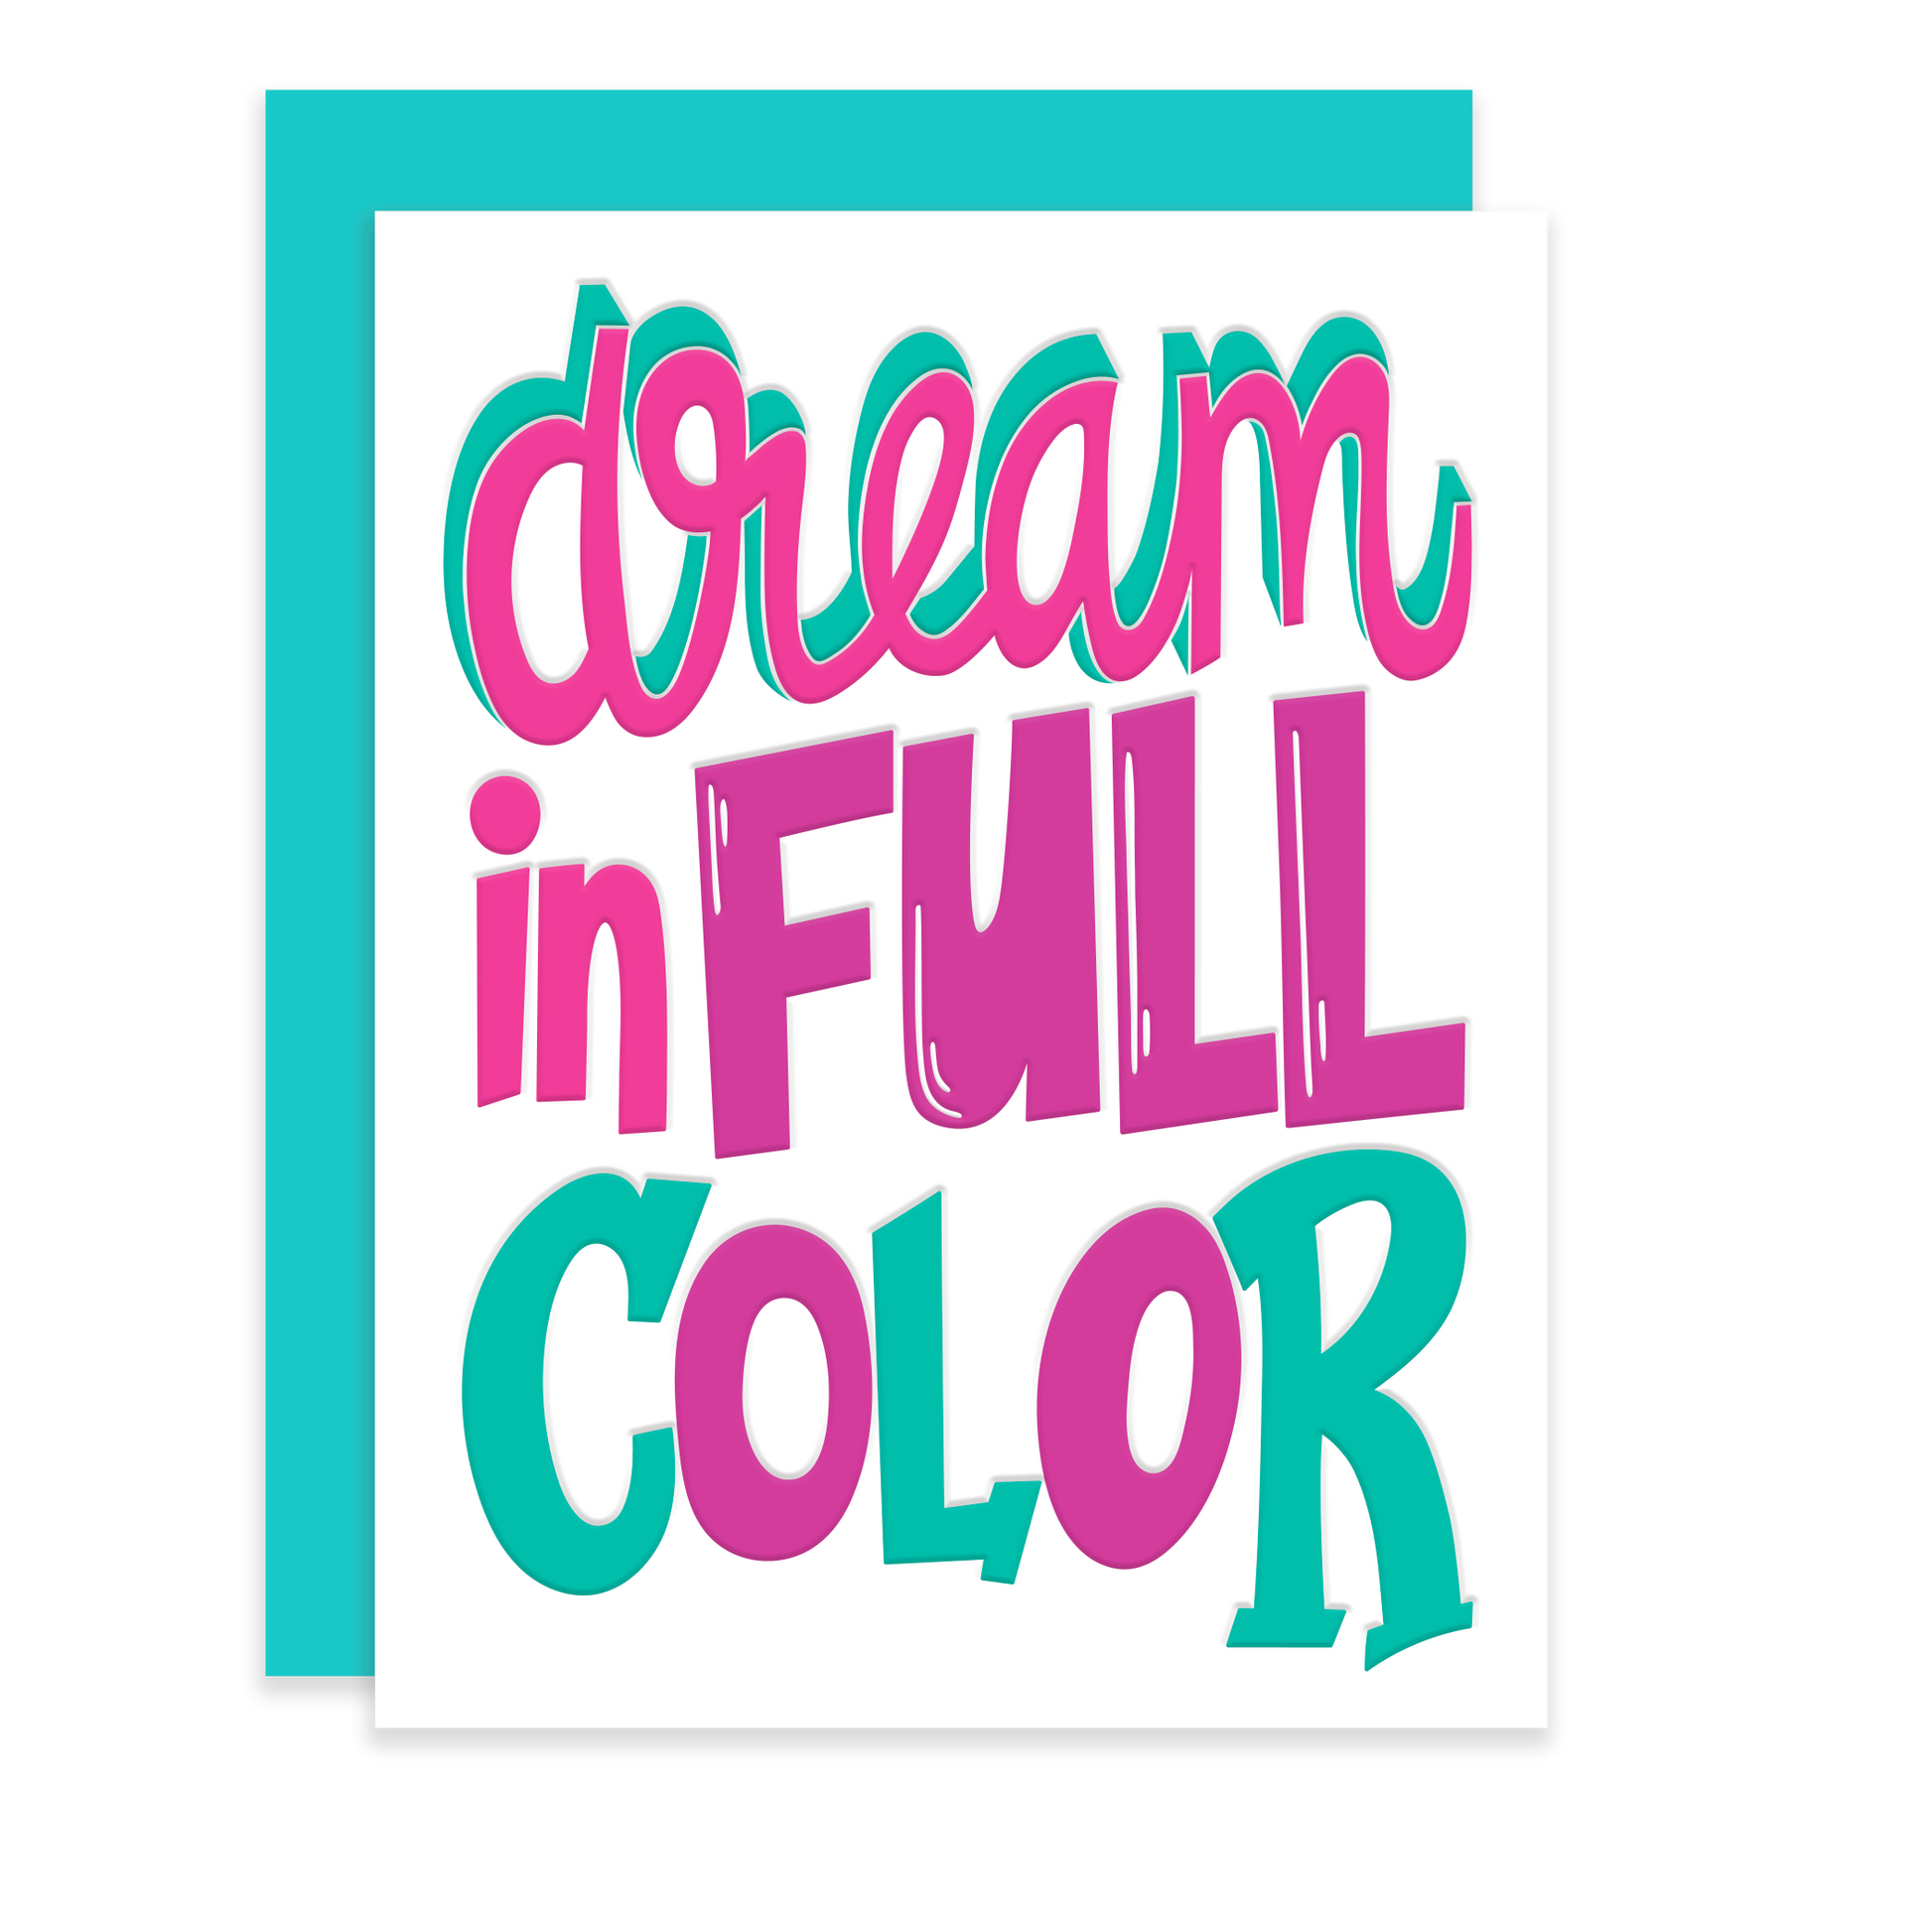 Letterpress Greeting card with the words Dream in Full Color